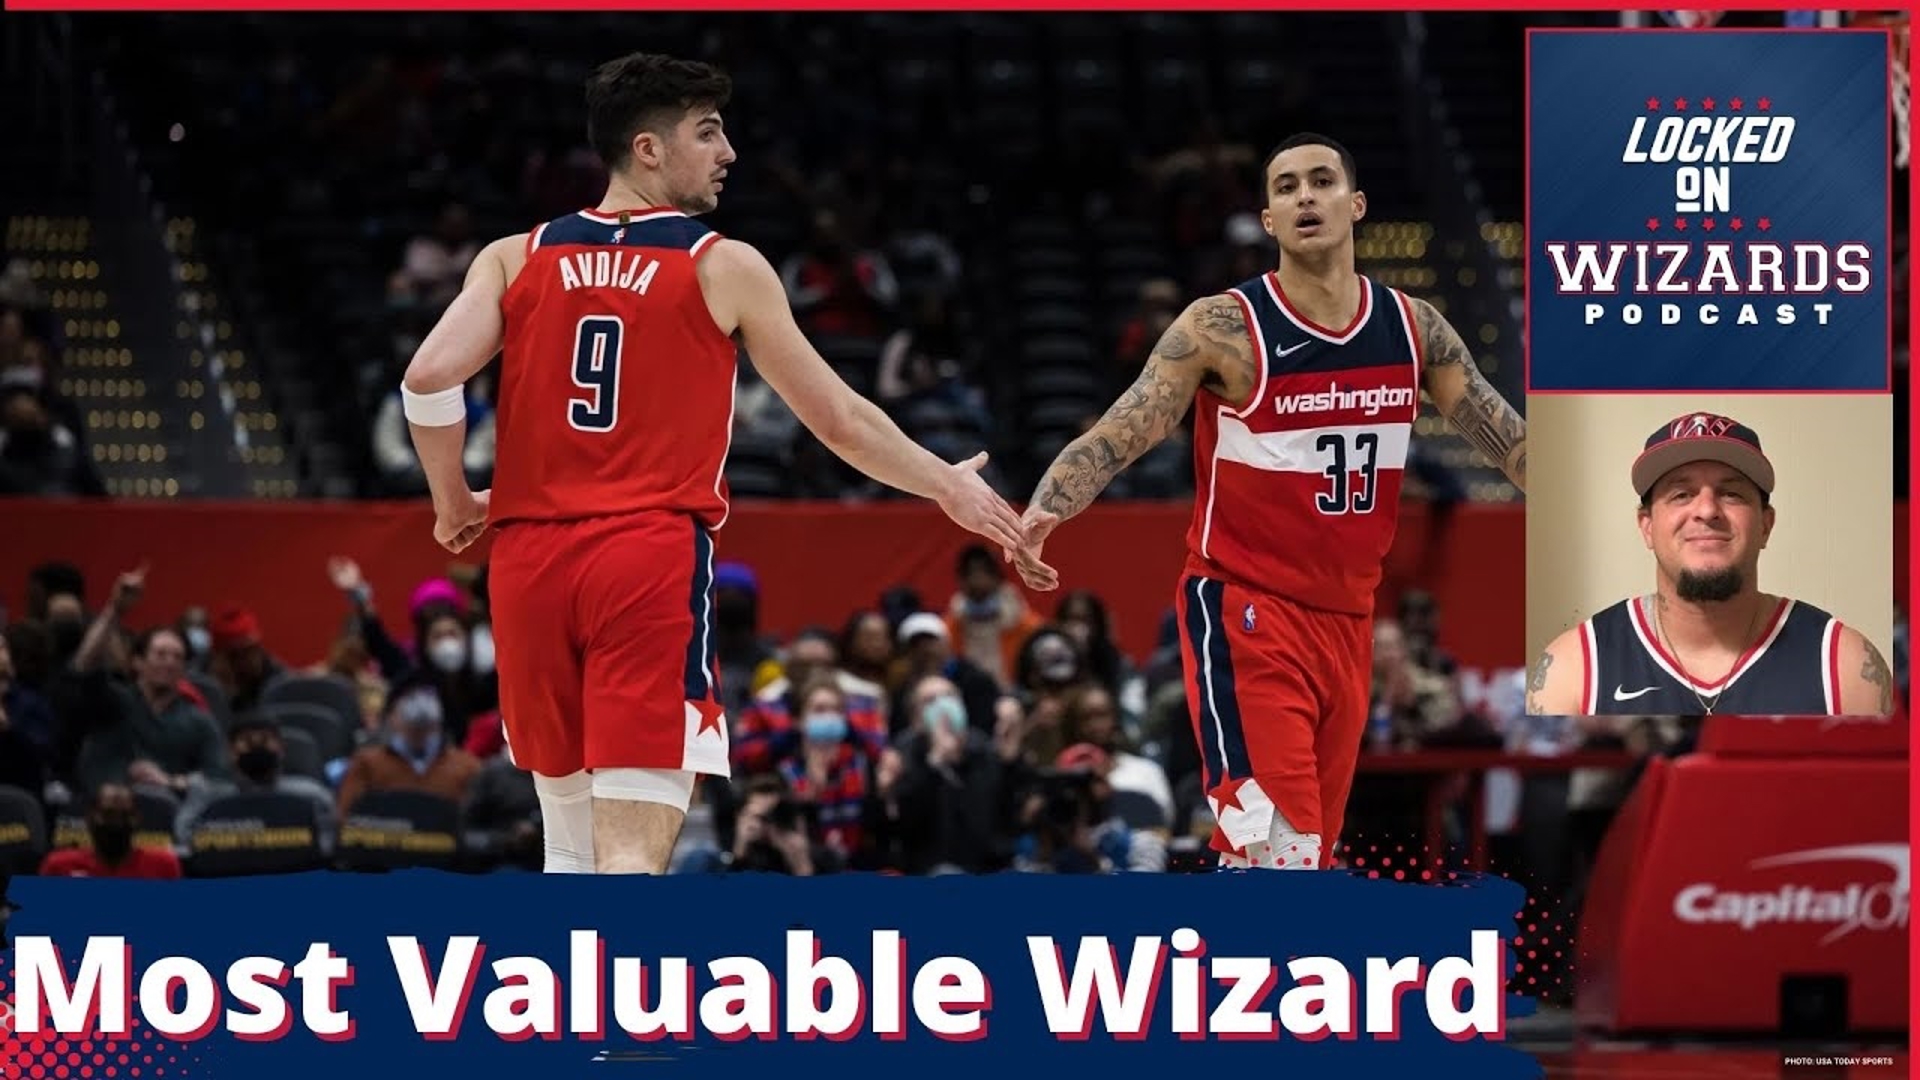 Brandon breaks down all three of the candidates for the "Most Valuable Wizard' Award.